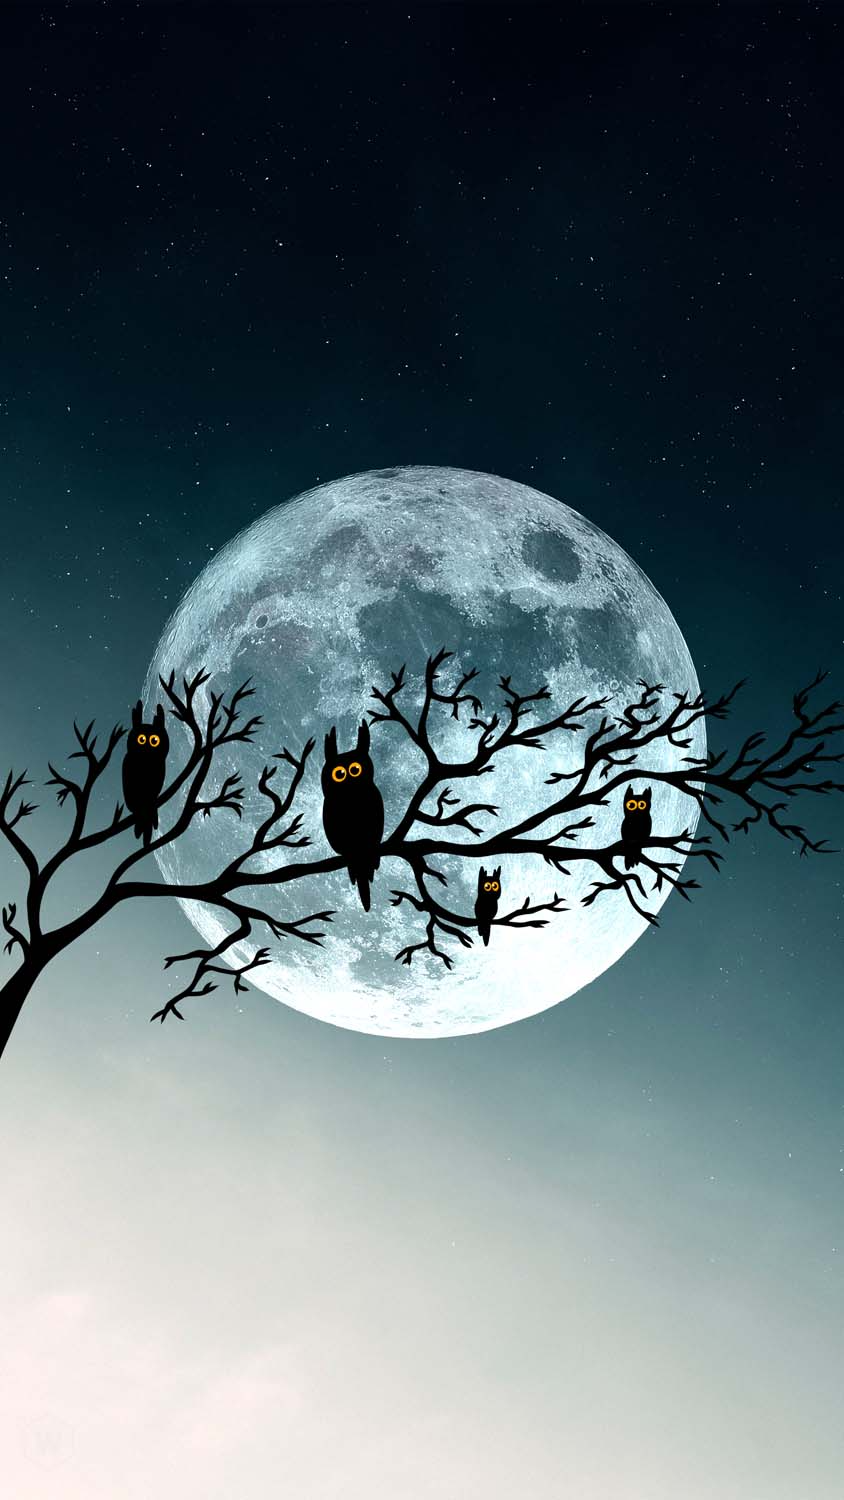 Halloween Moon And Owls IPhone Wallpaper HD  IPhone Wallpapers